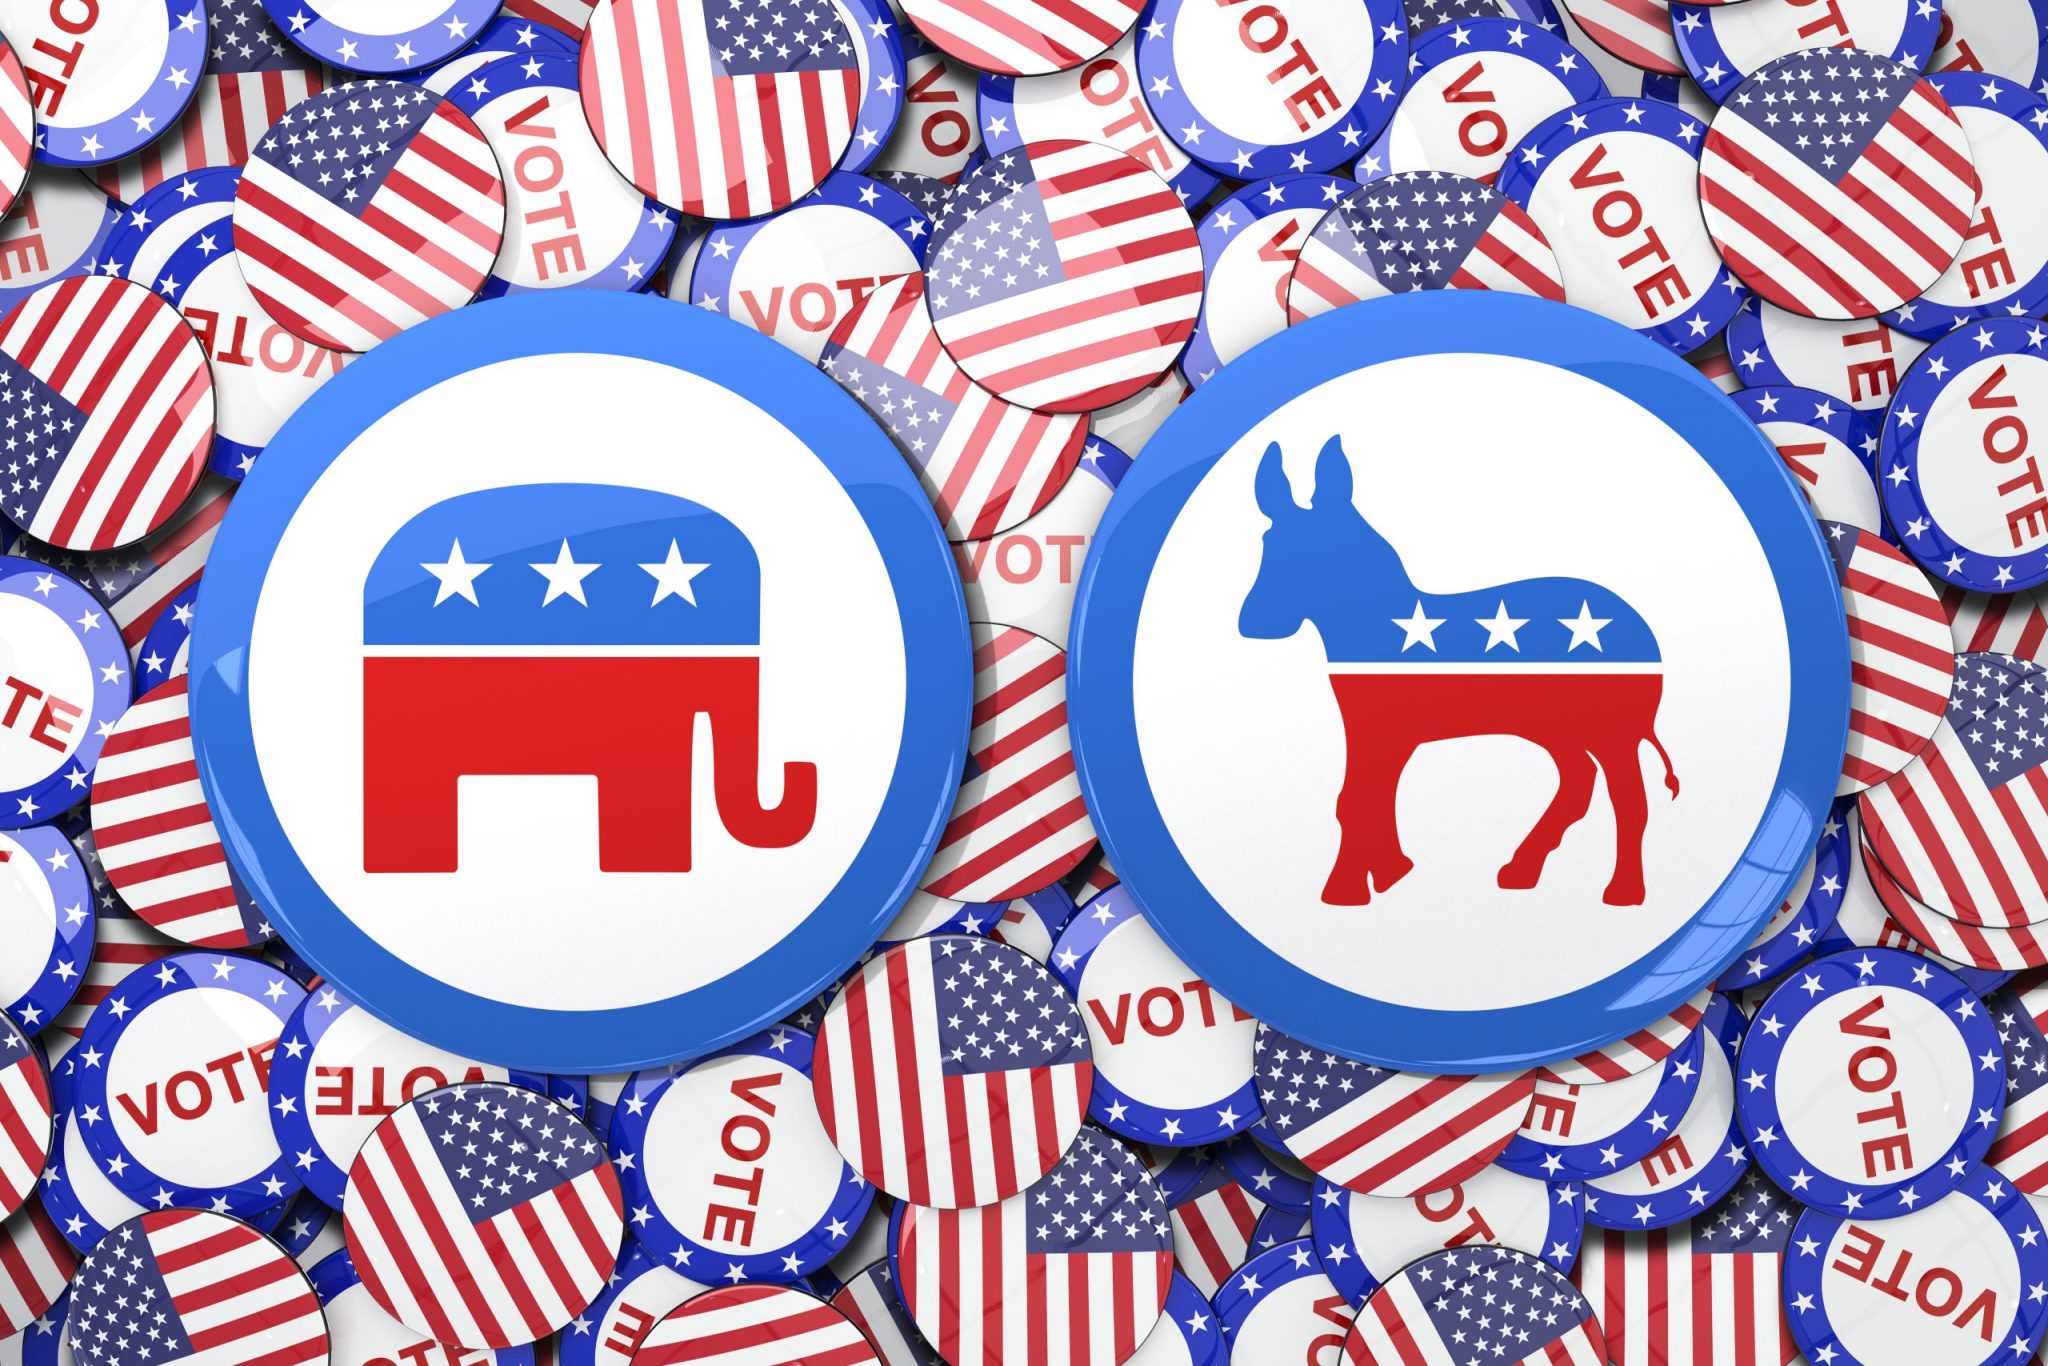 Republican and Democratic symbols on top of vote and american flag pins